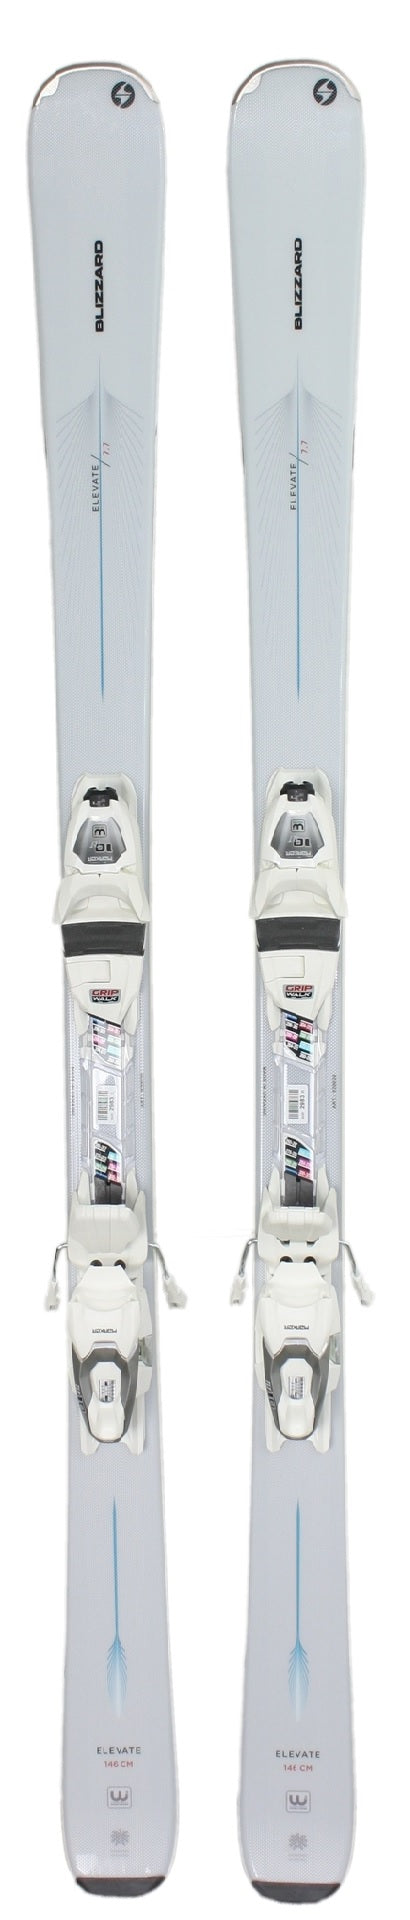 Blizzard Elevate 7.7 Ladies Snow Skis With Marker TLT10 Binding